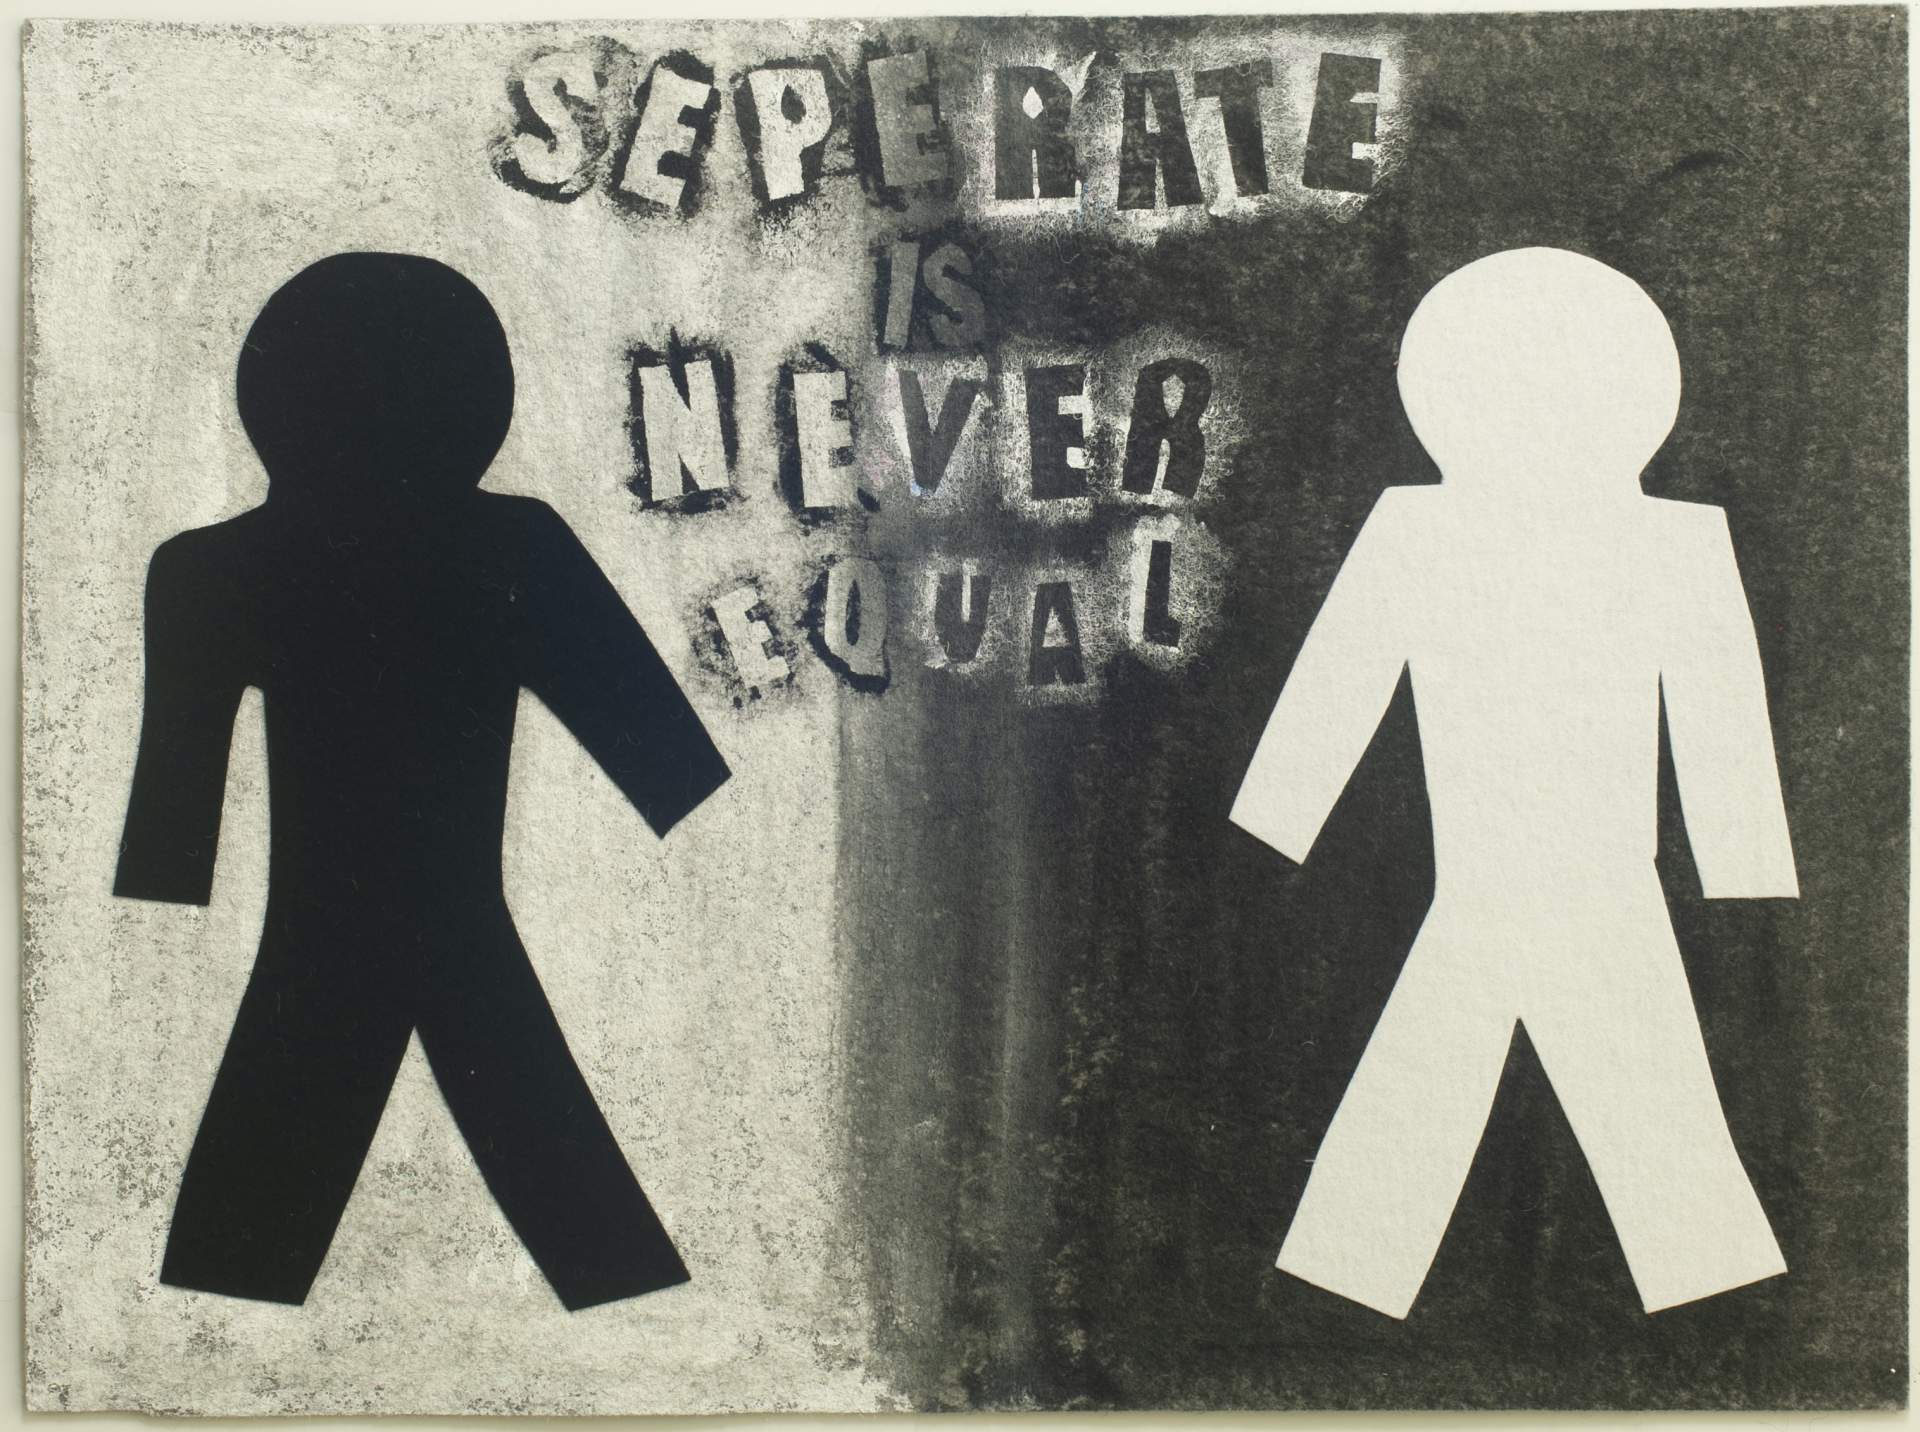 Seperate [sic] Never Equal